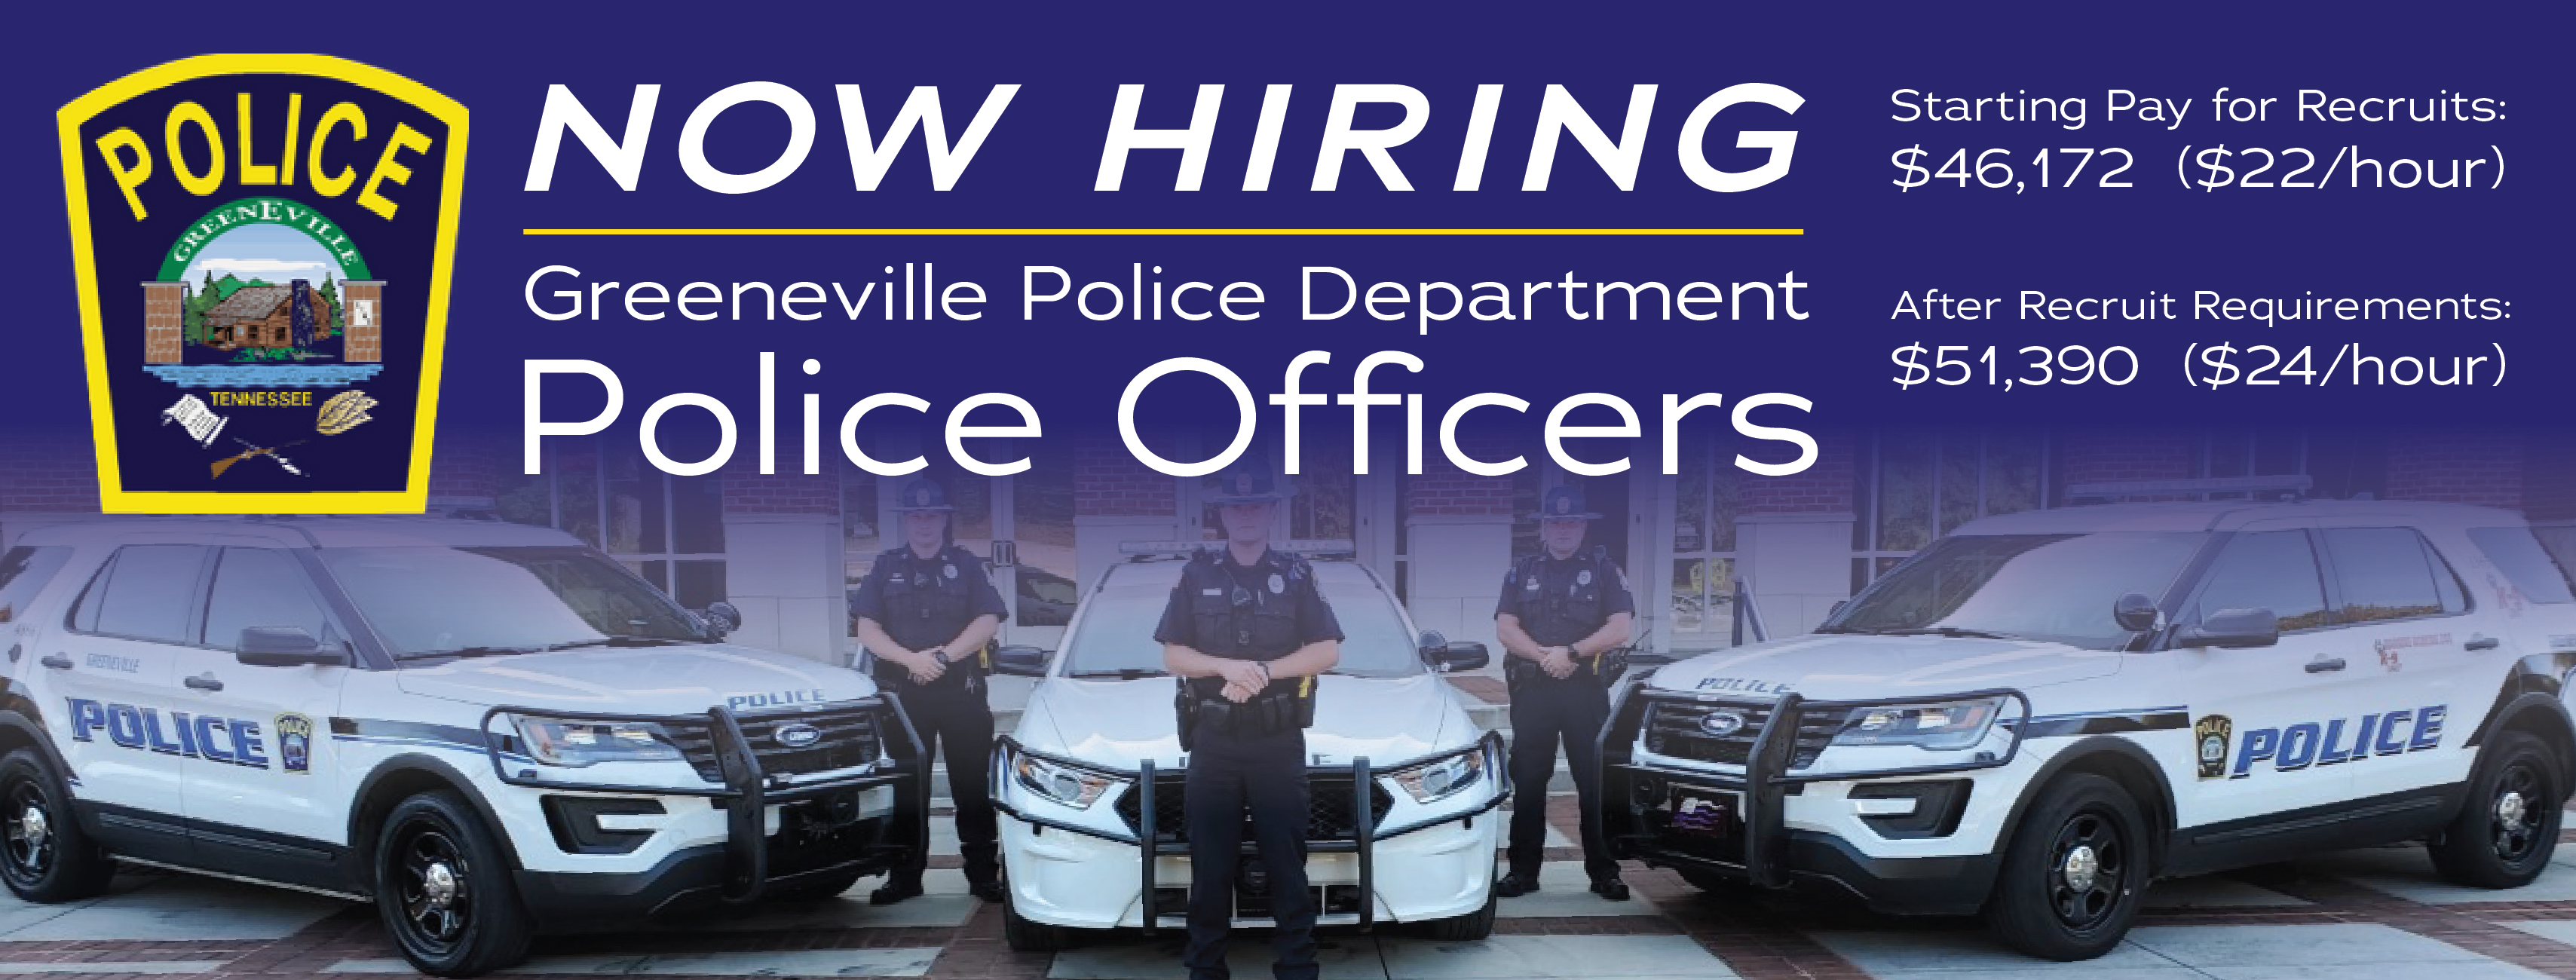 Now Hiring Greeneville Police Department